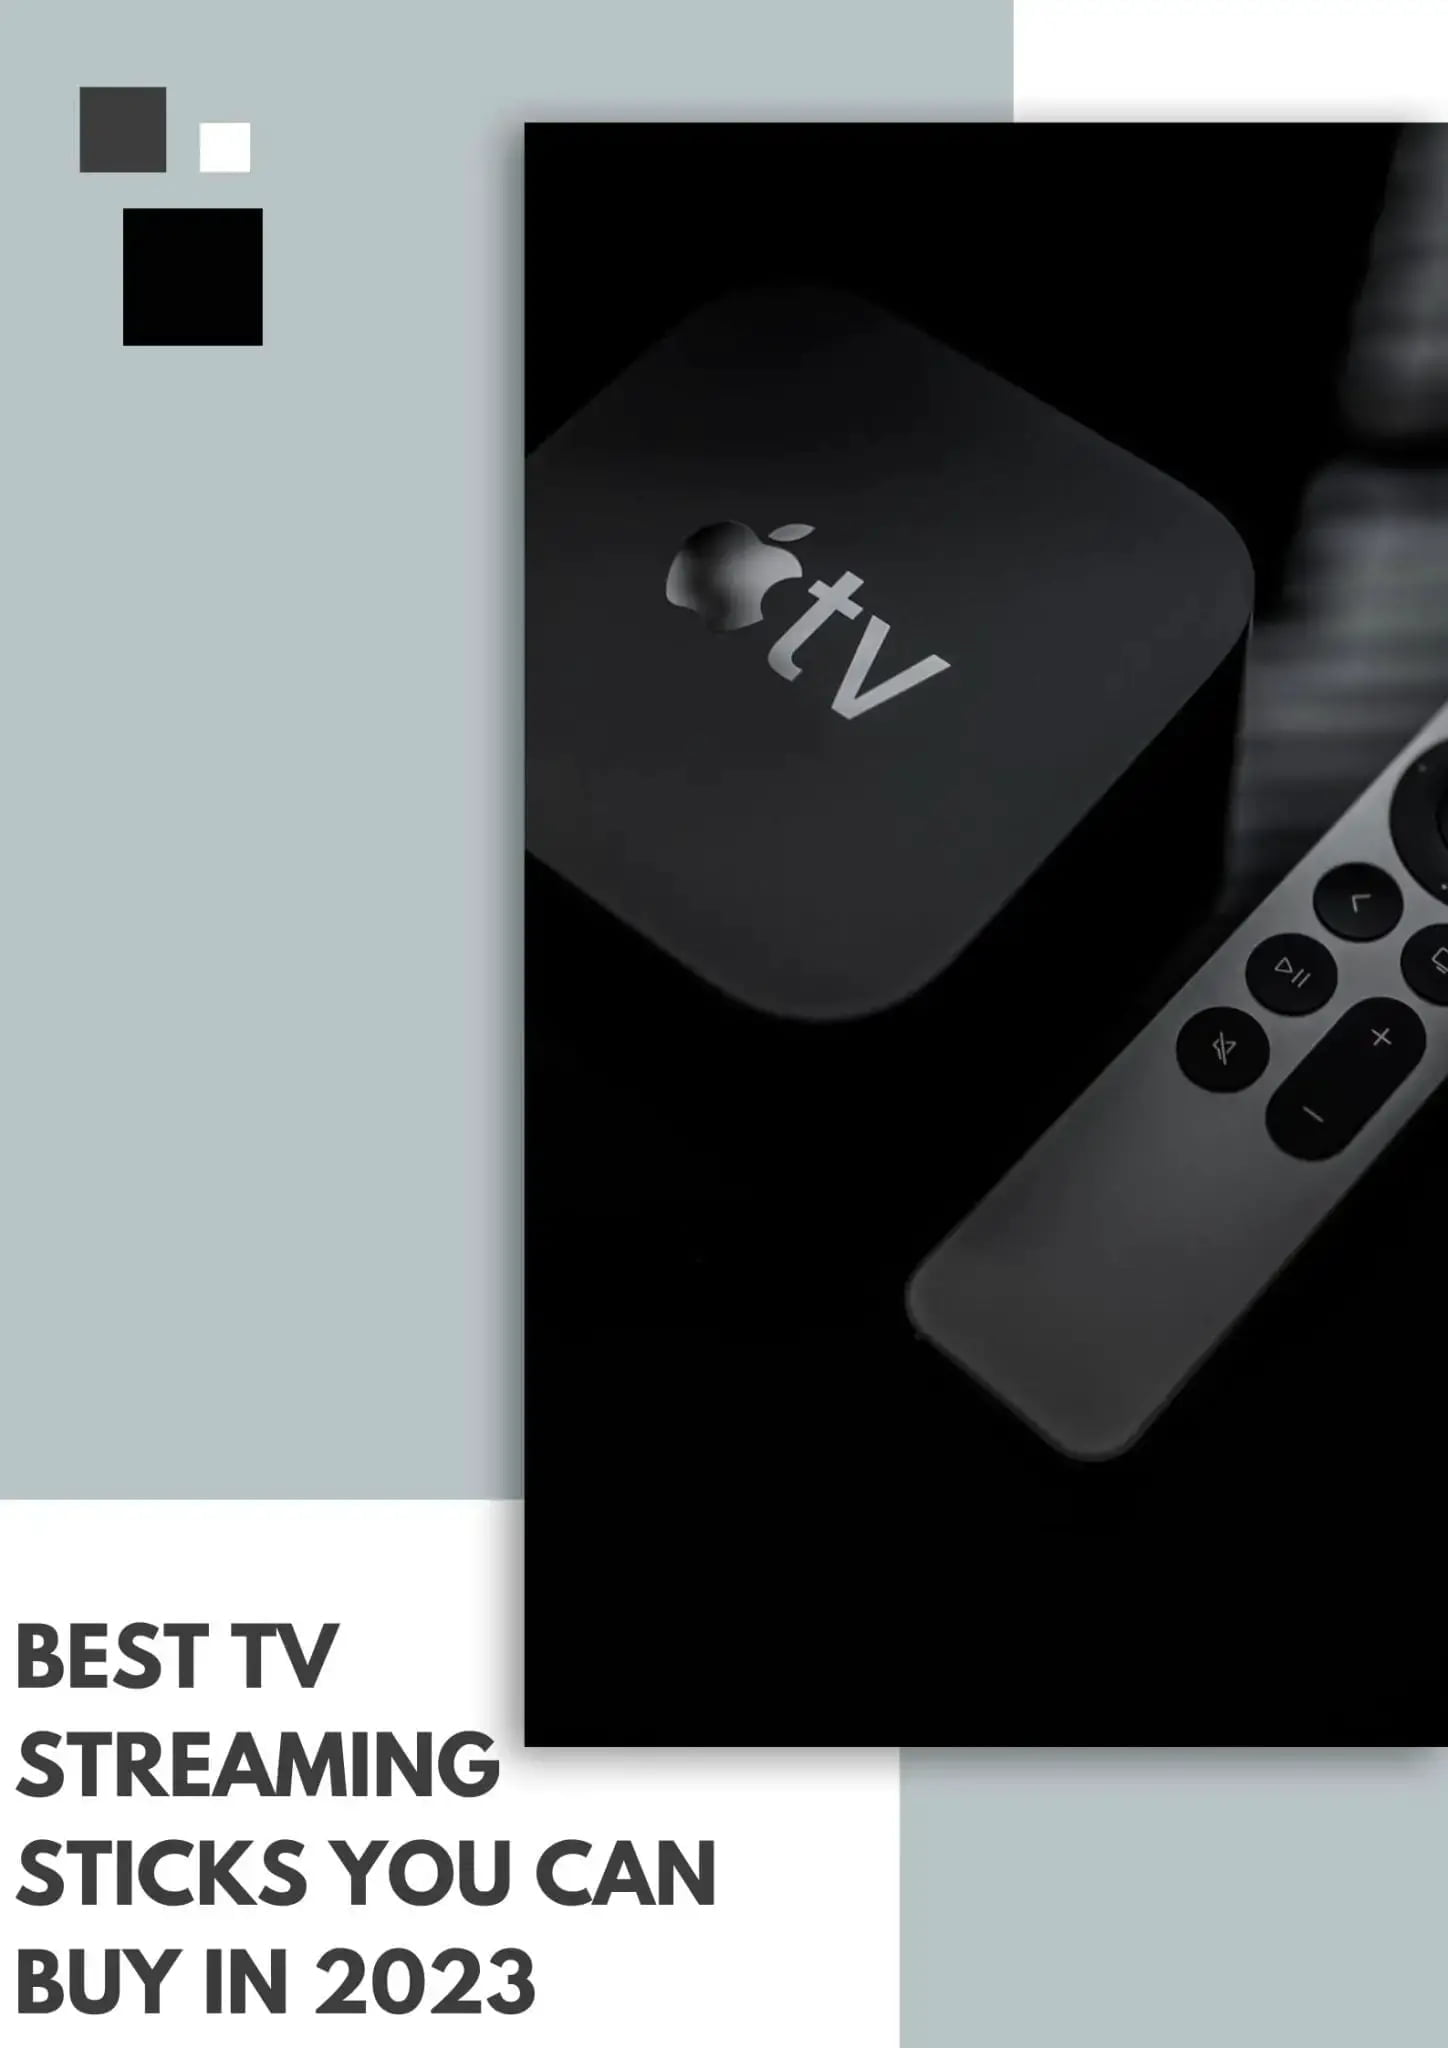 Best TV Streaming Sticks You Can Buy in 2023